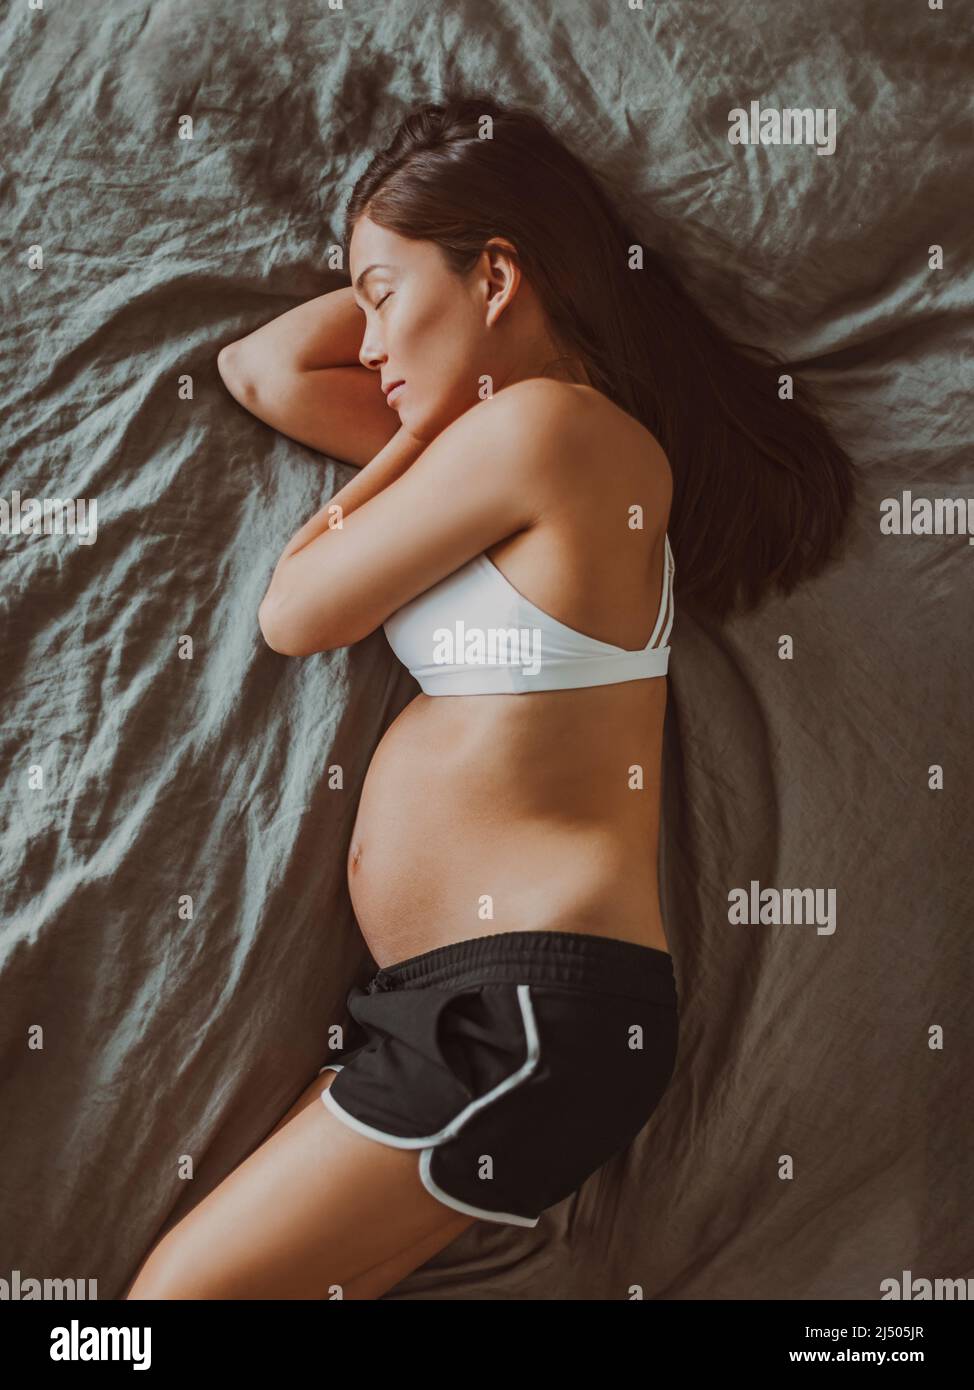 Sleeping pregnant woman top view of pregnancy belly during first trimester. Asian girl in pajamas lying on her side to sleep in bed. Vertical crop Stock Photo